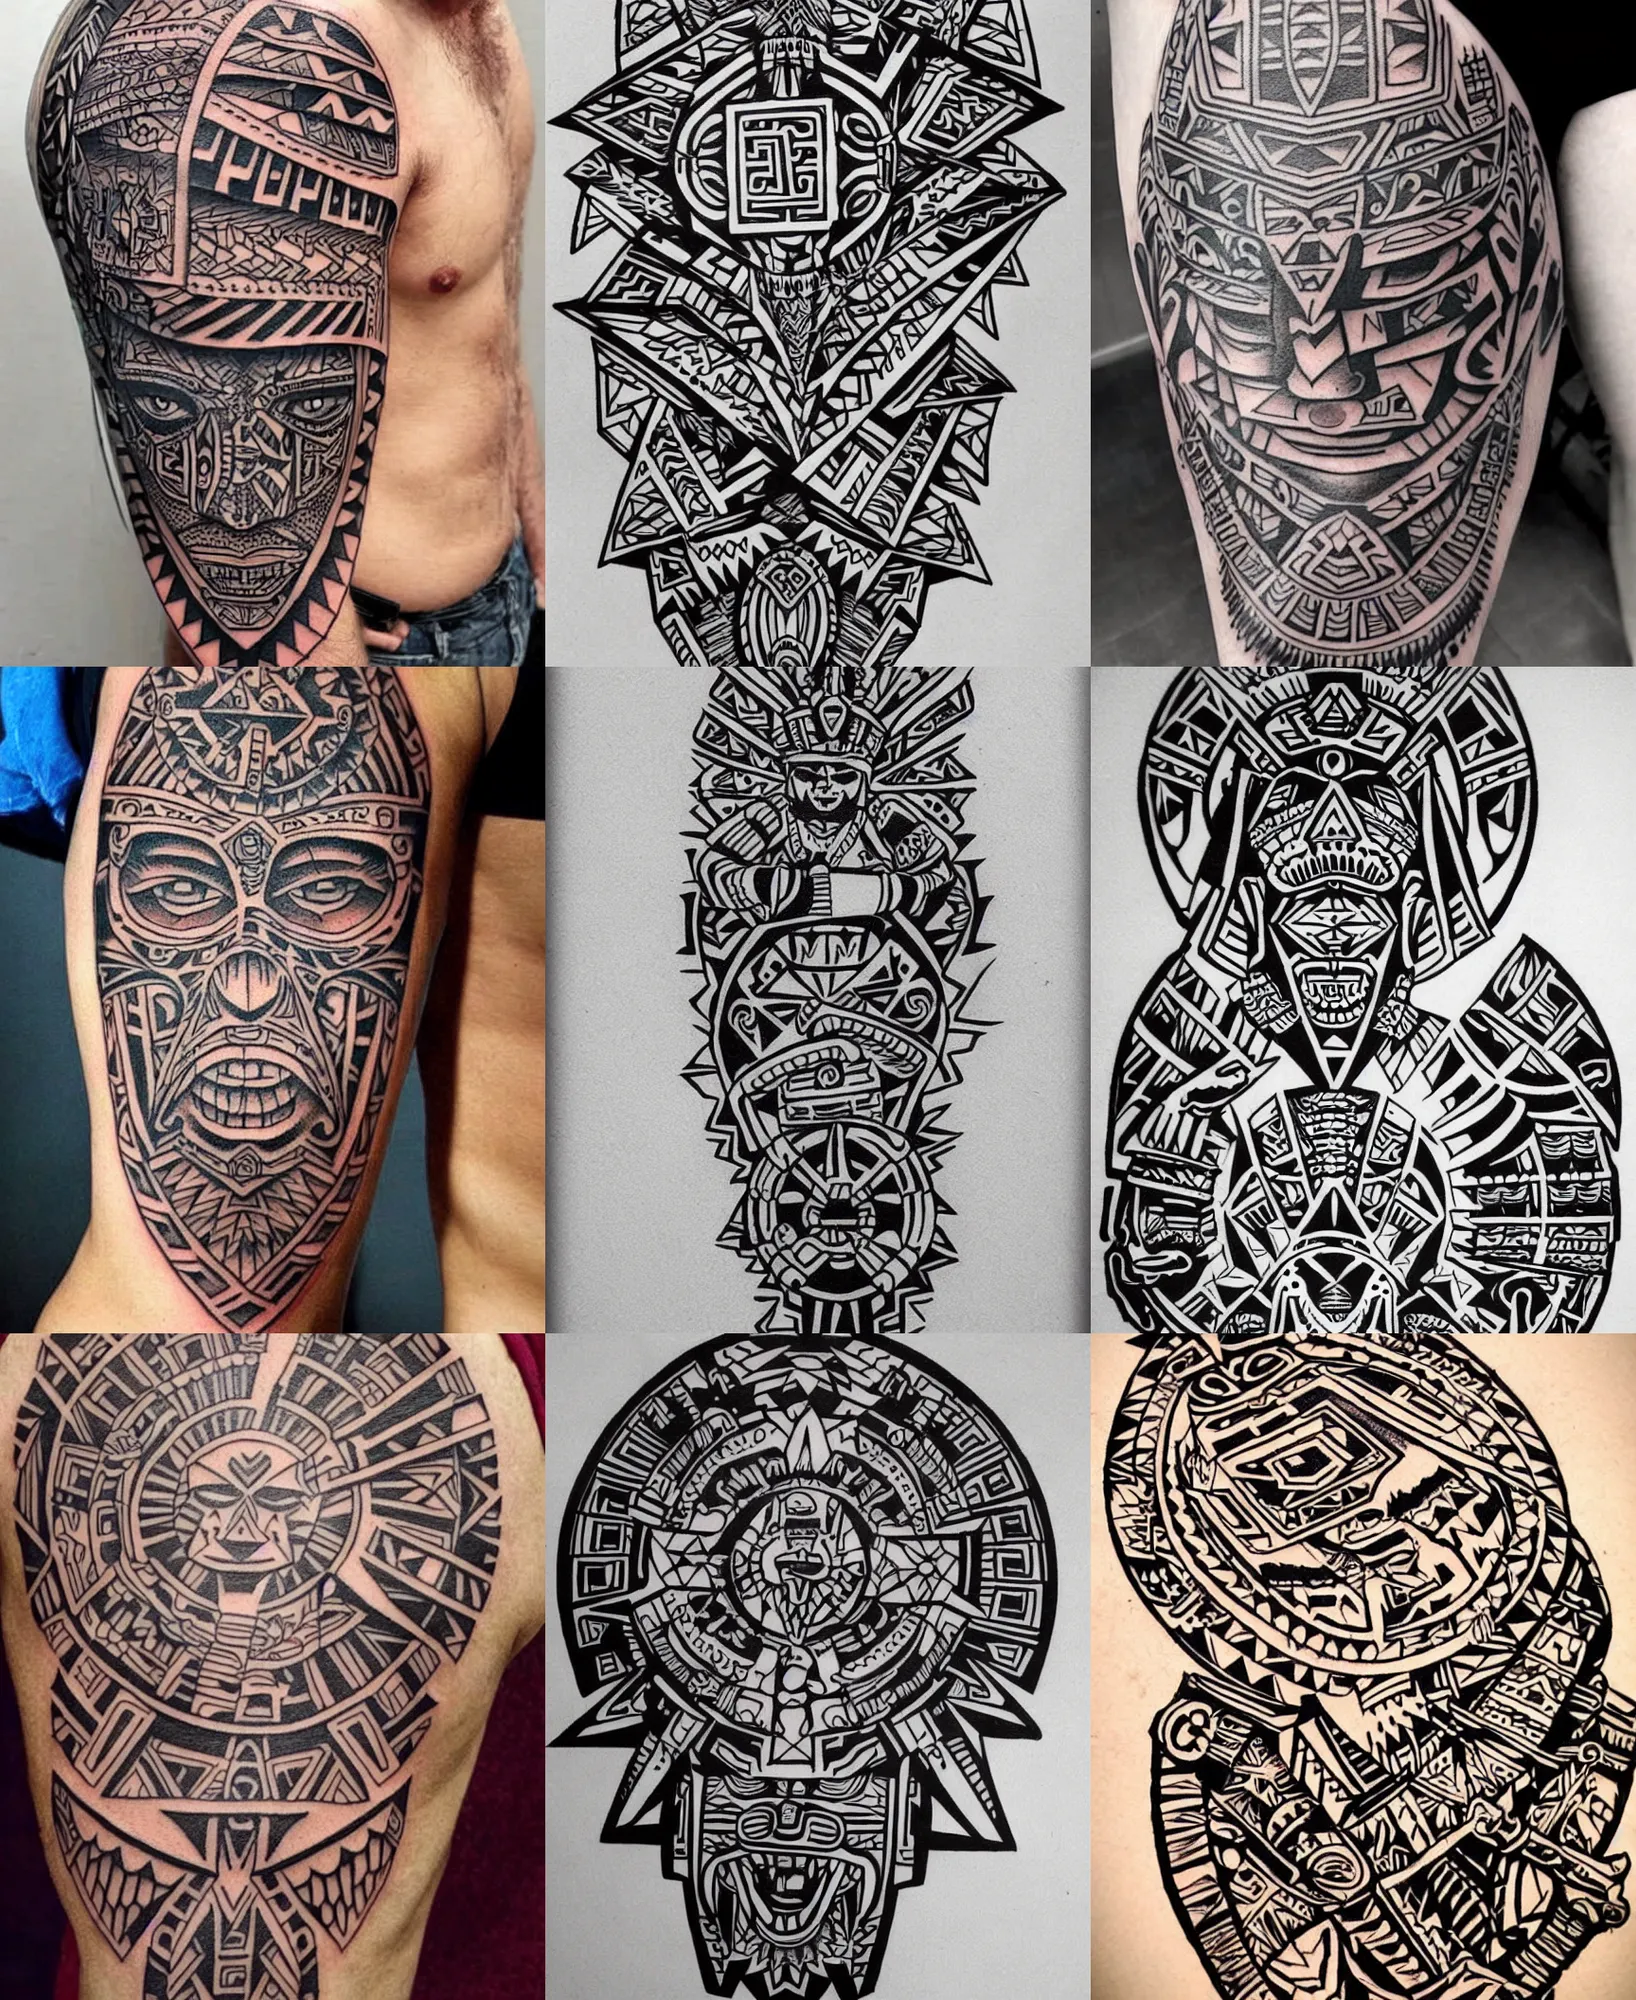 Temporary Tattoos For Men Guys Boys & Teens - Fake Half Arm Tattoos Sleeves  For Arms Shoulders Chest Back Legs Cross Skull Owl Clock Scorpion Rose  Realistic Waterproof Transfers 8 Sheets 8x6 Saturn